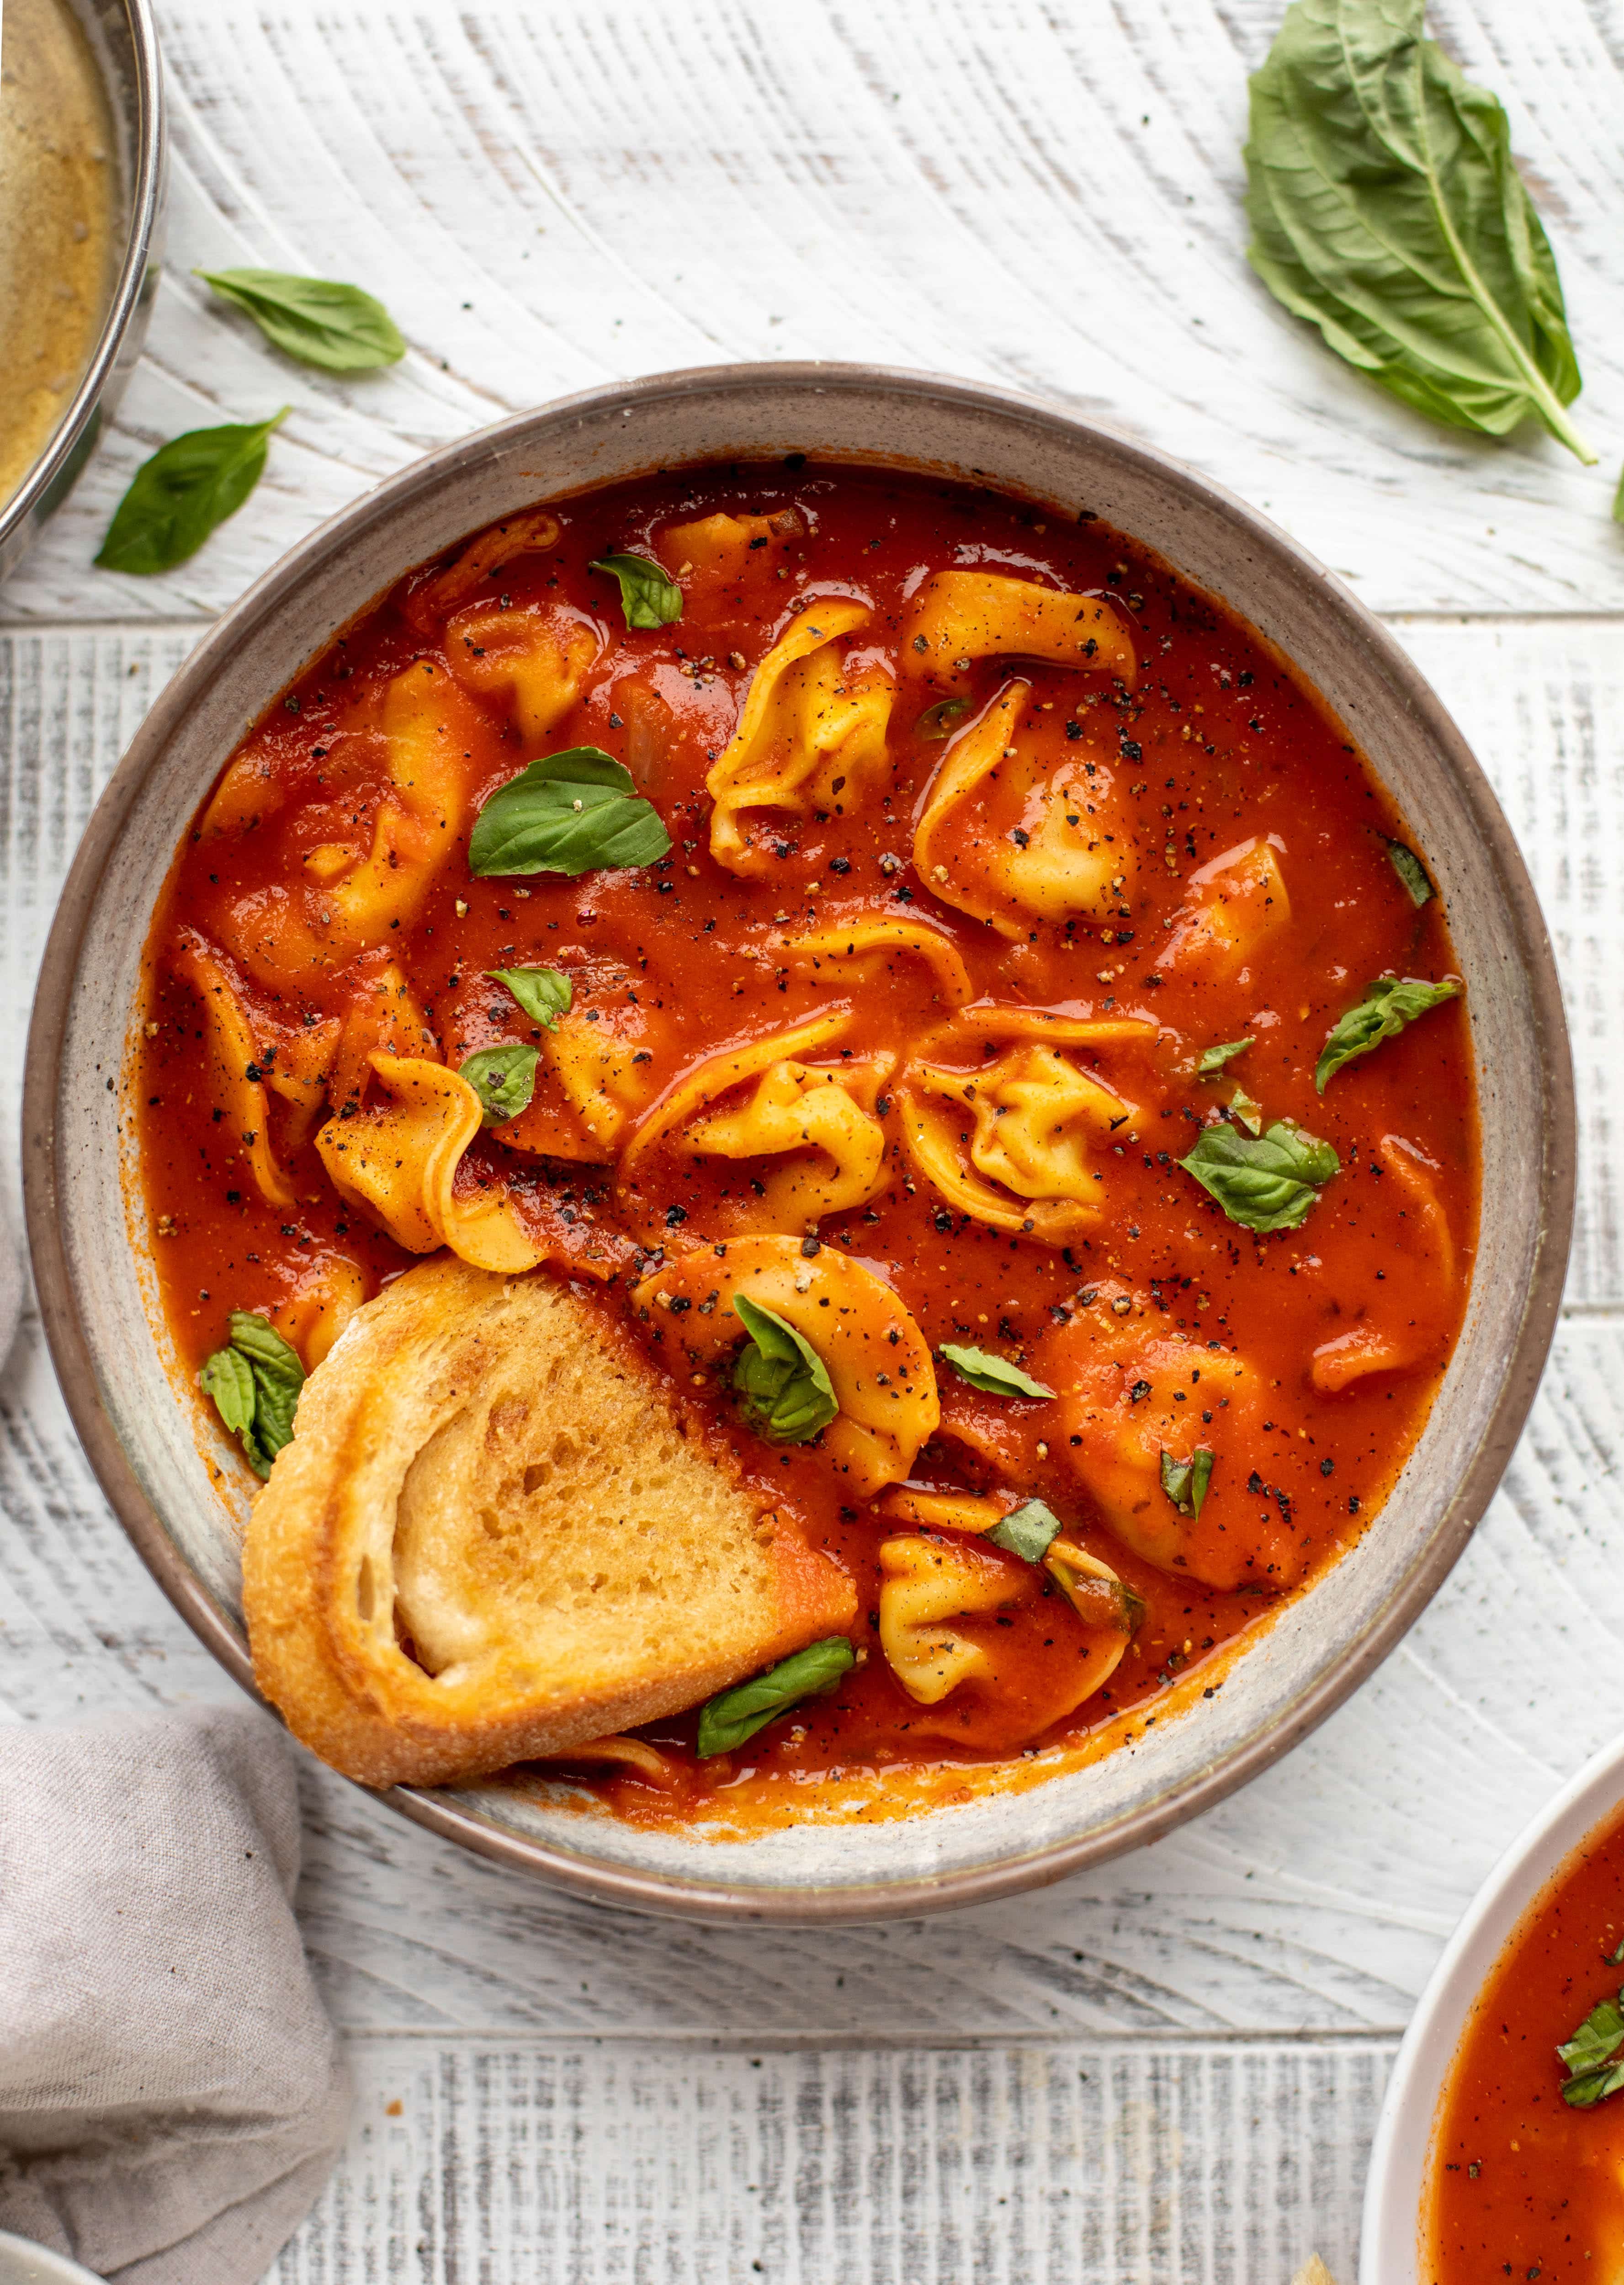 This curried tomato tortellini soup has so much flavor! Serve with cheesy tortellini and brown butter garlic toasts for the perfect weeknight meal.